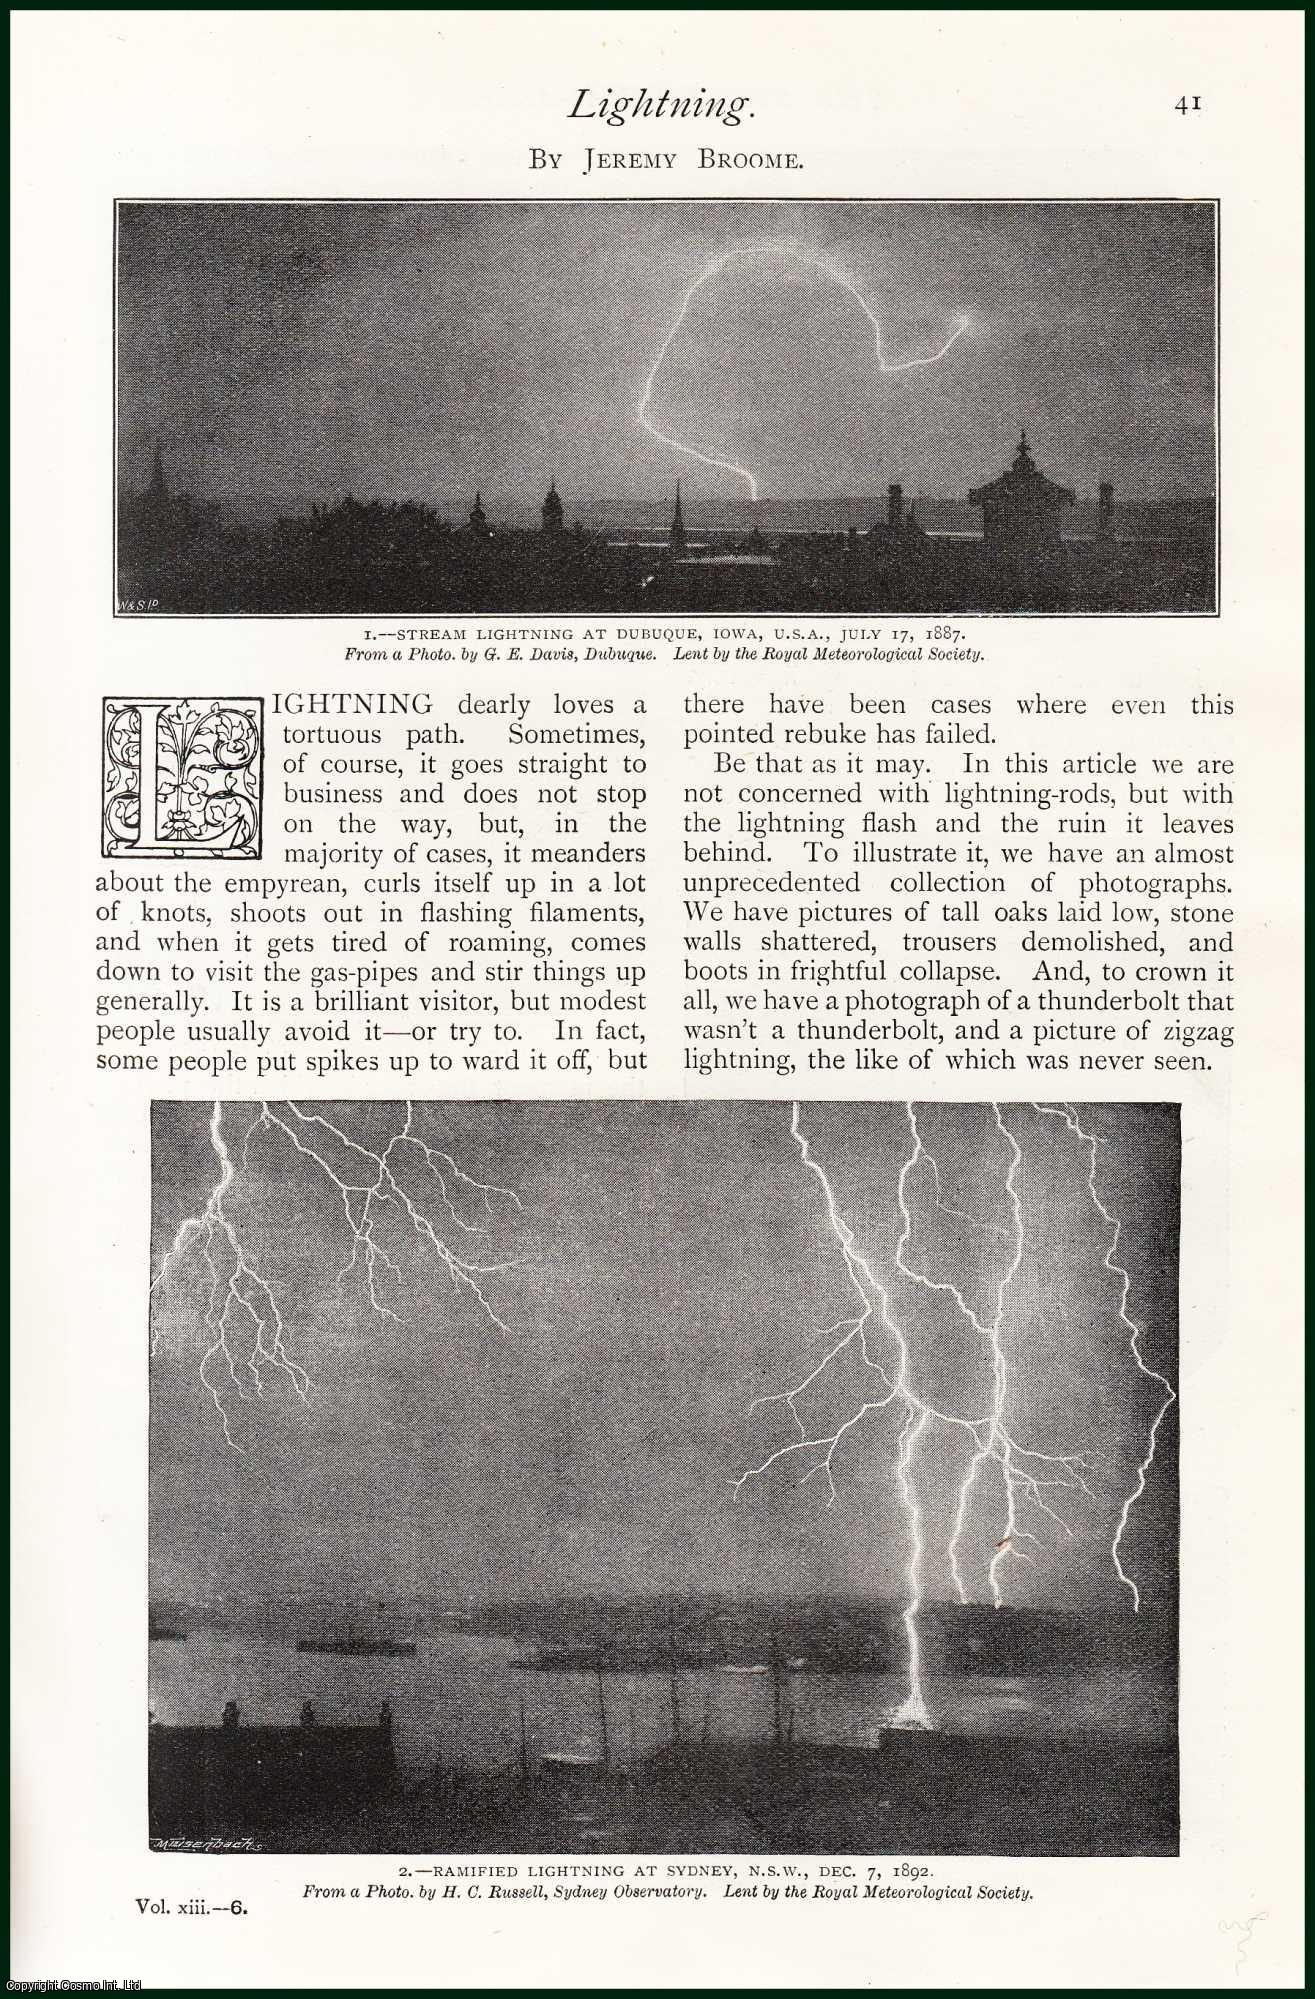 Jeremy Broome - Lightning. An uncommon original article from The Strand Magazine, 1897.